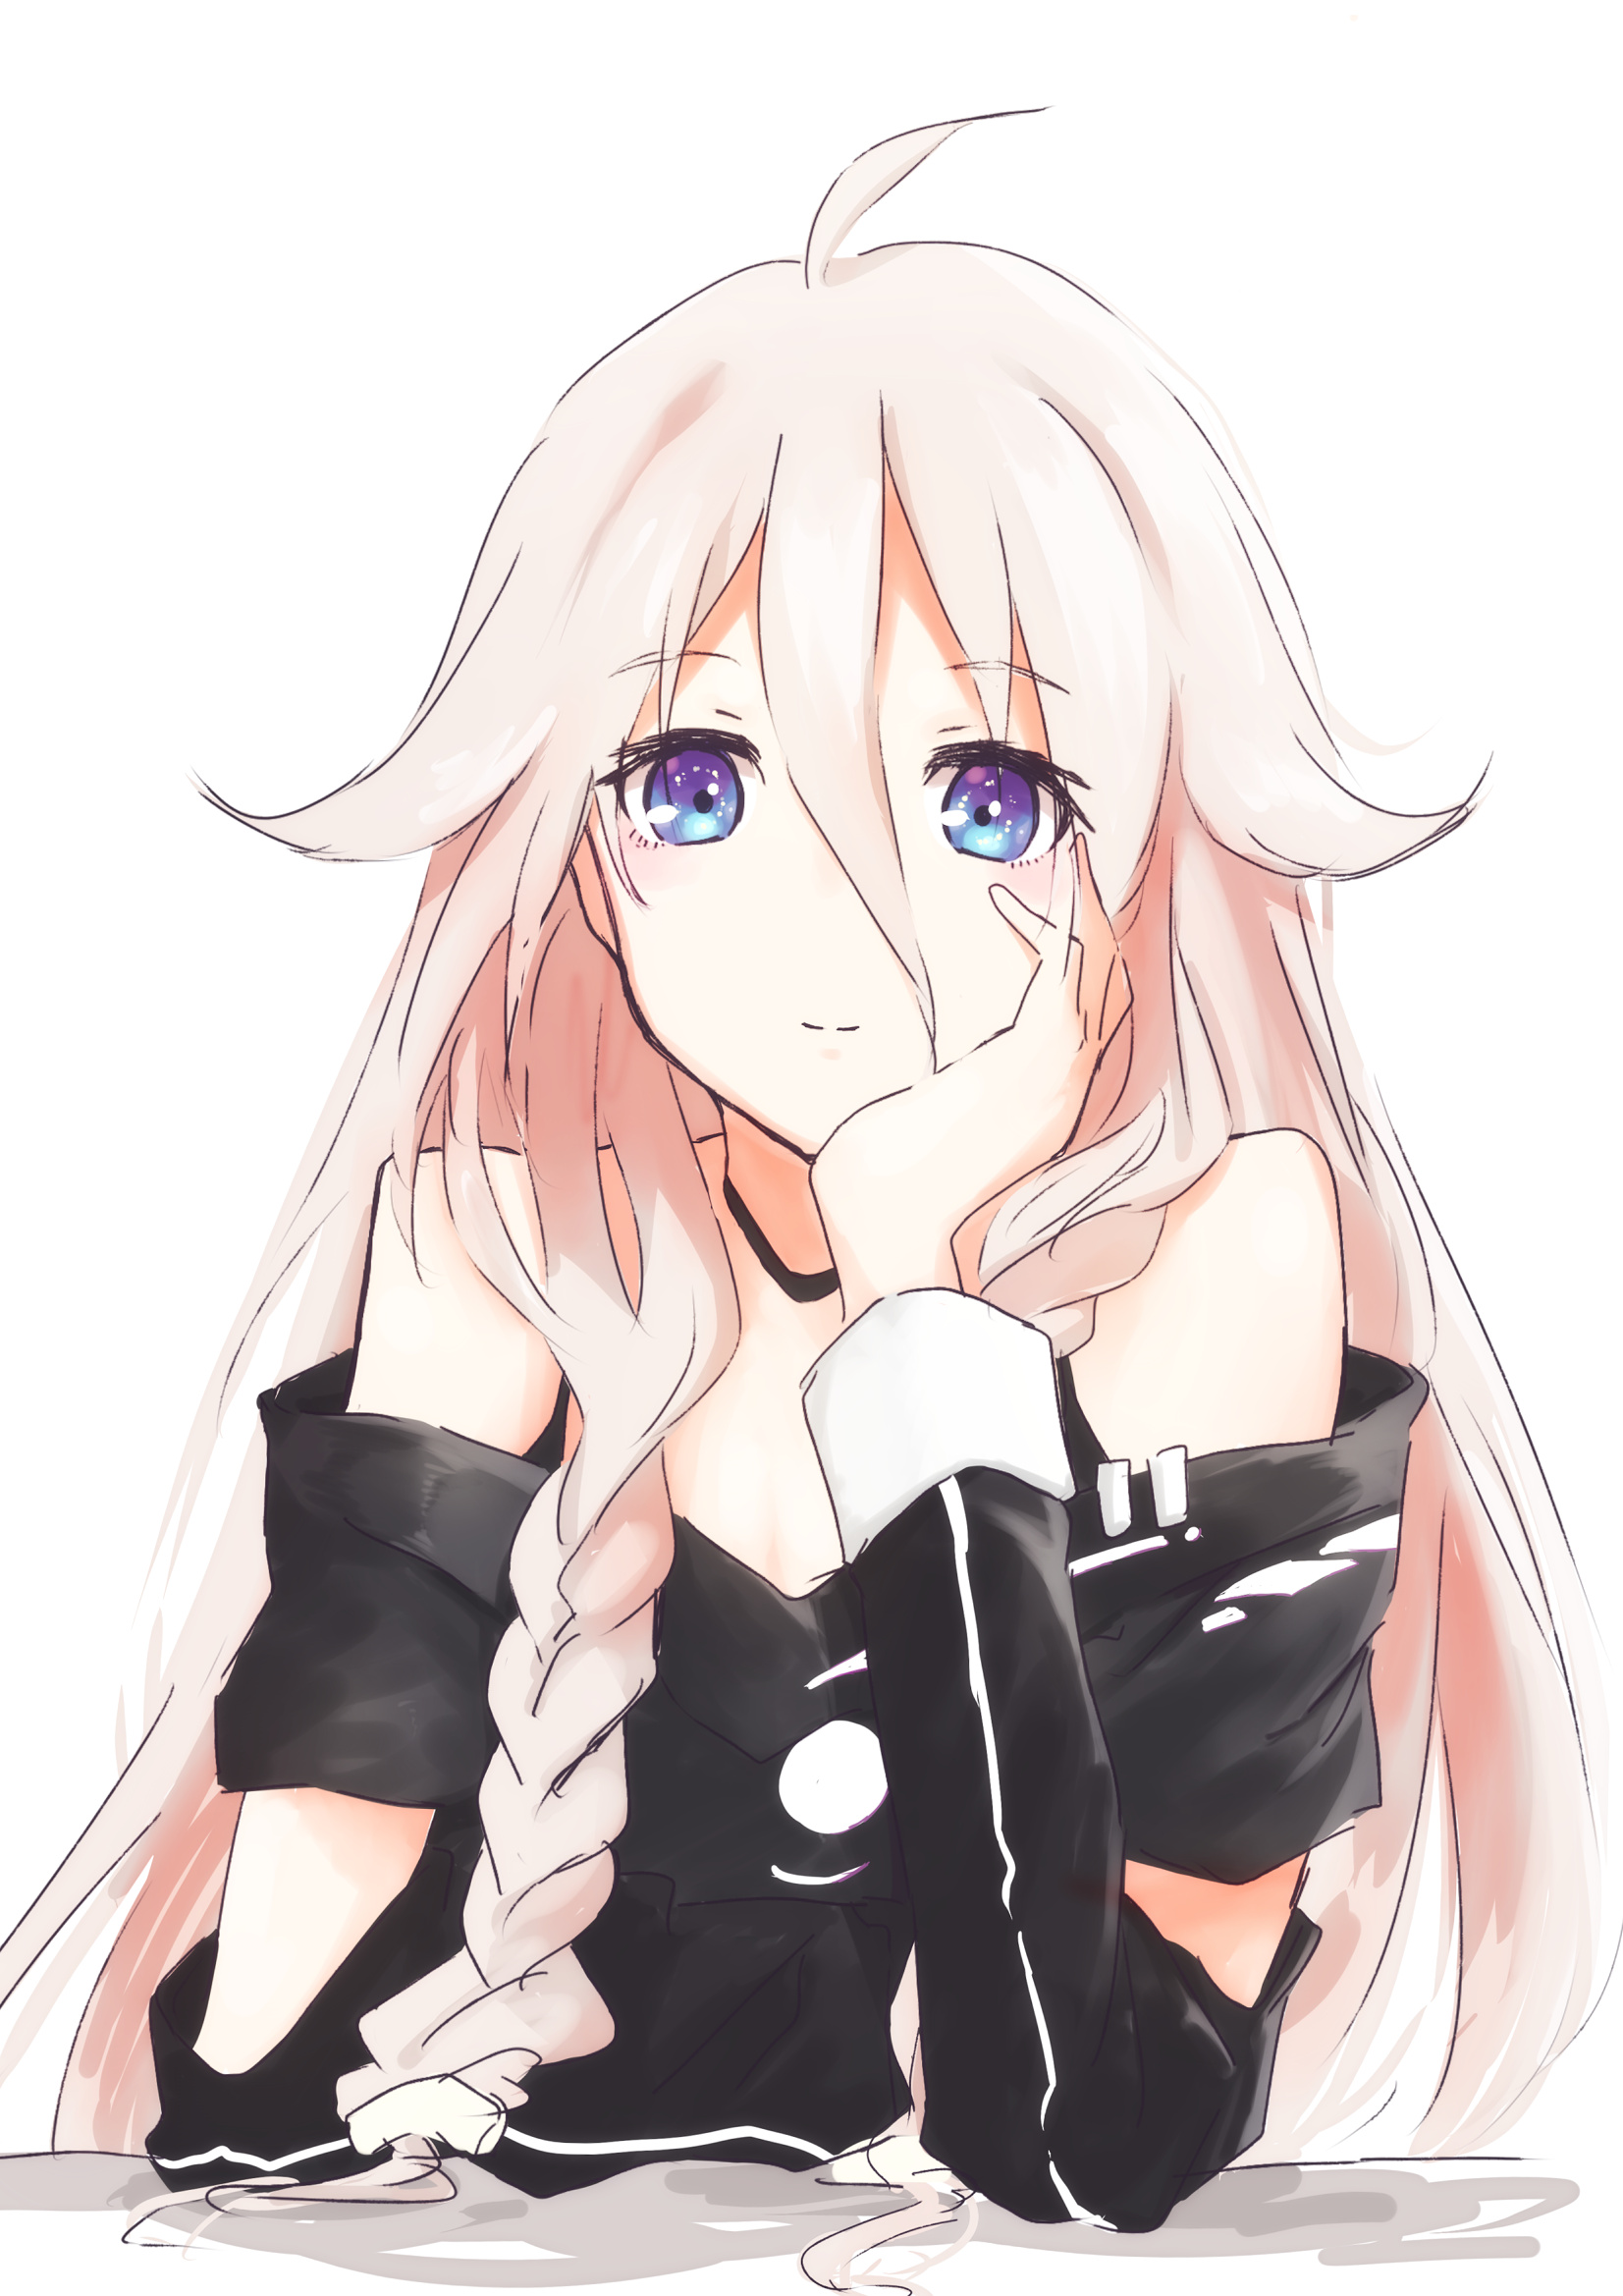 IA Vocaloid, Beautiful anime artwork, Vocaloid-inspired illustration, Anime character, 1660x2340 HD Handy